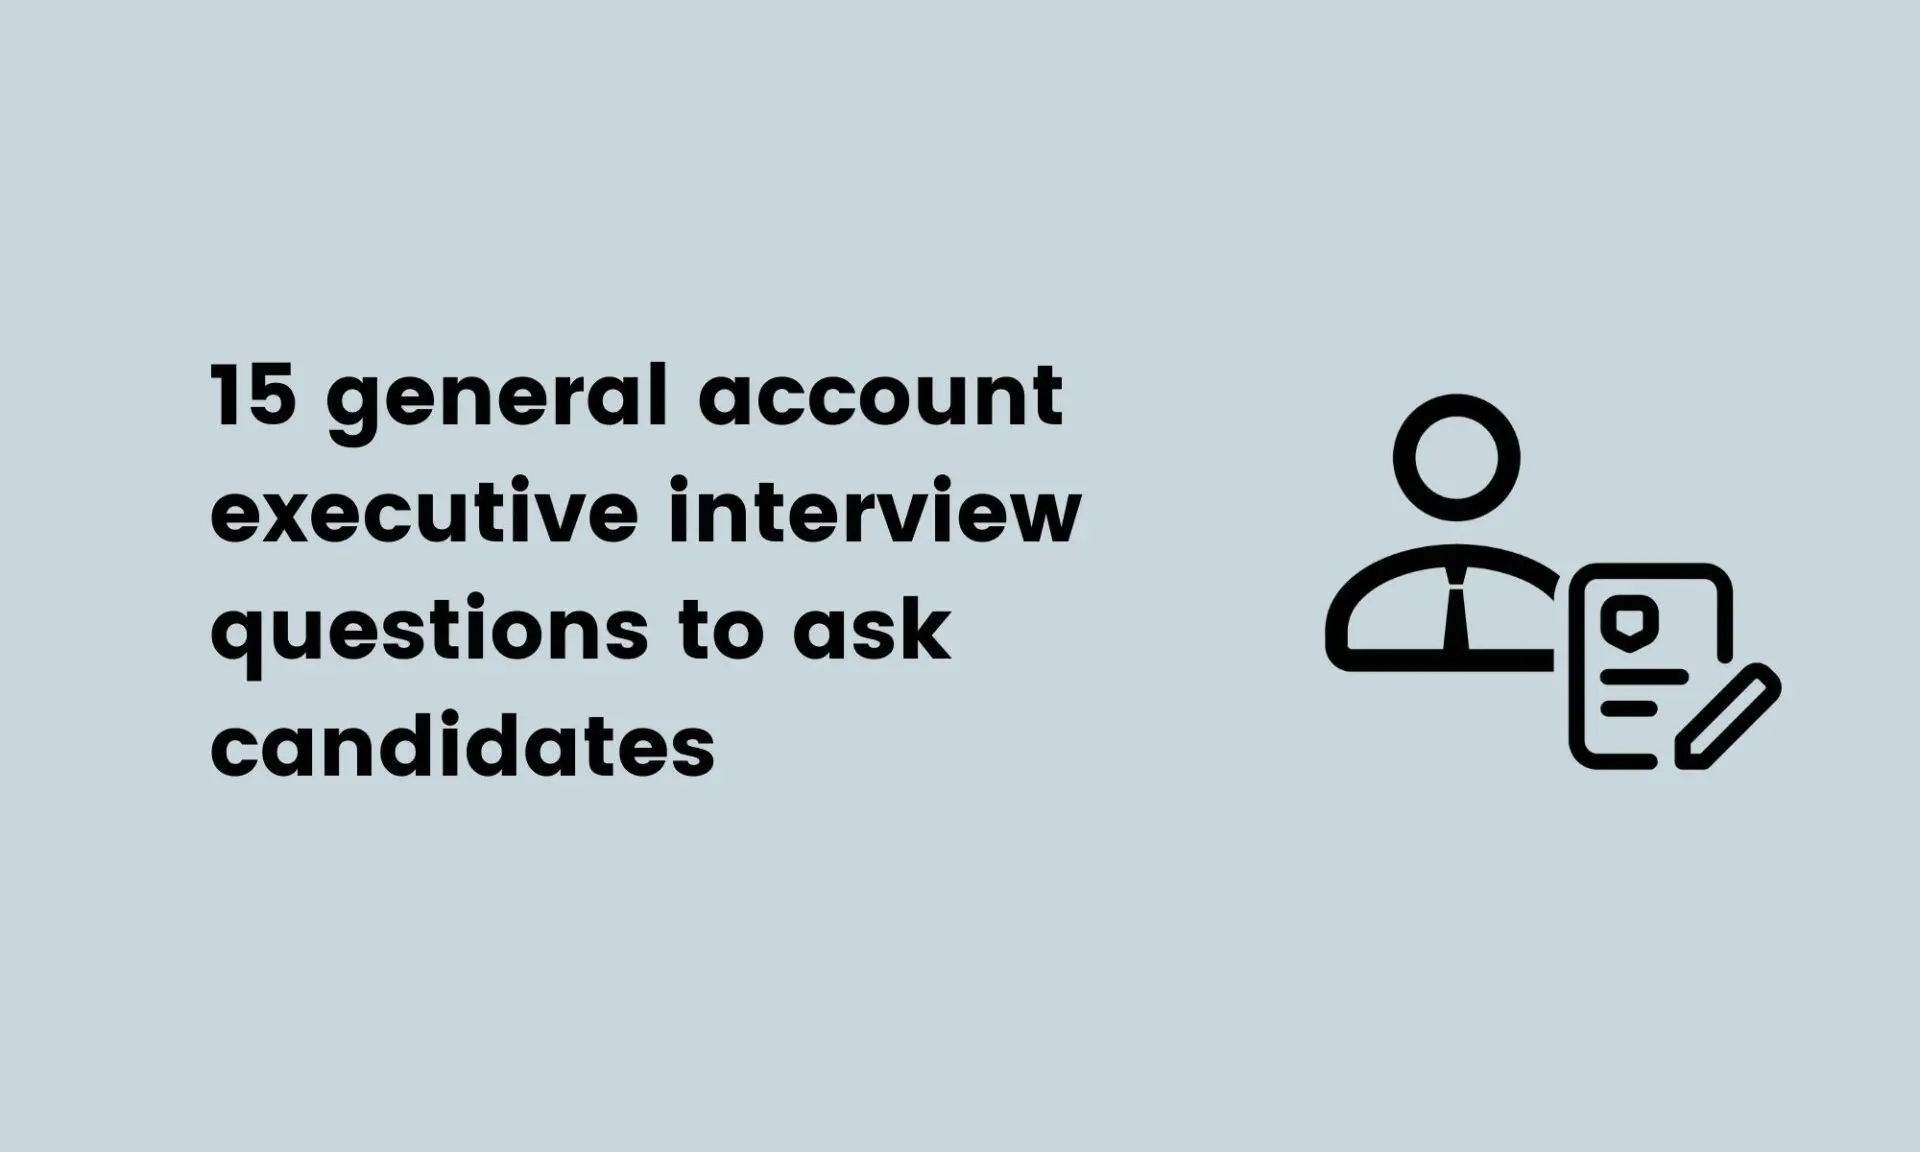 15 general account executive interview questions to ask candidates